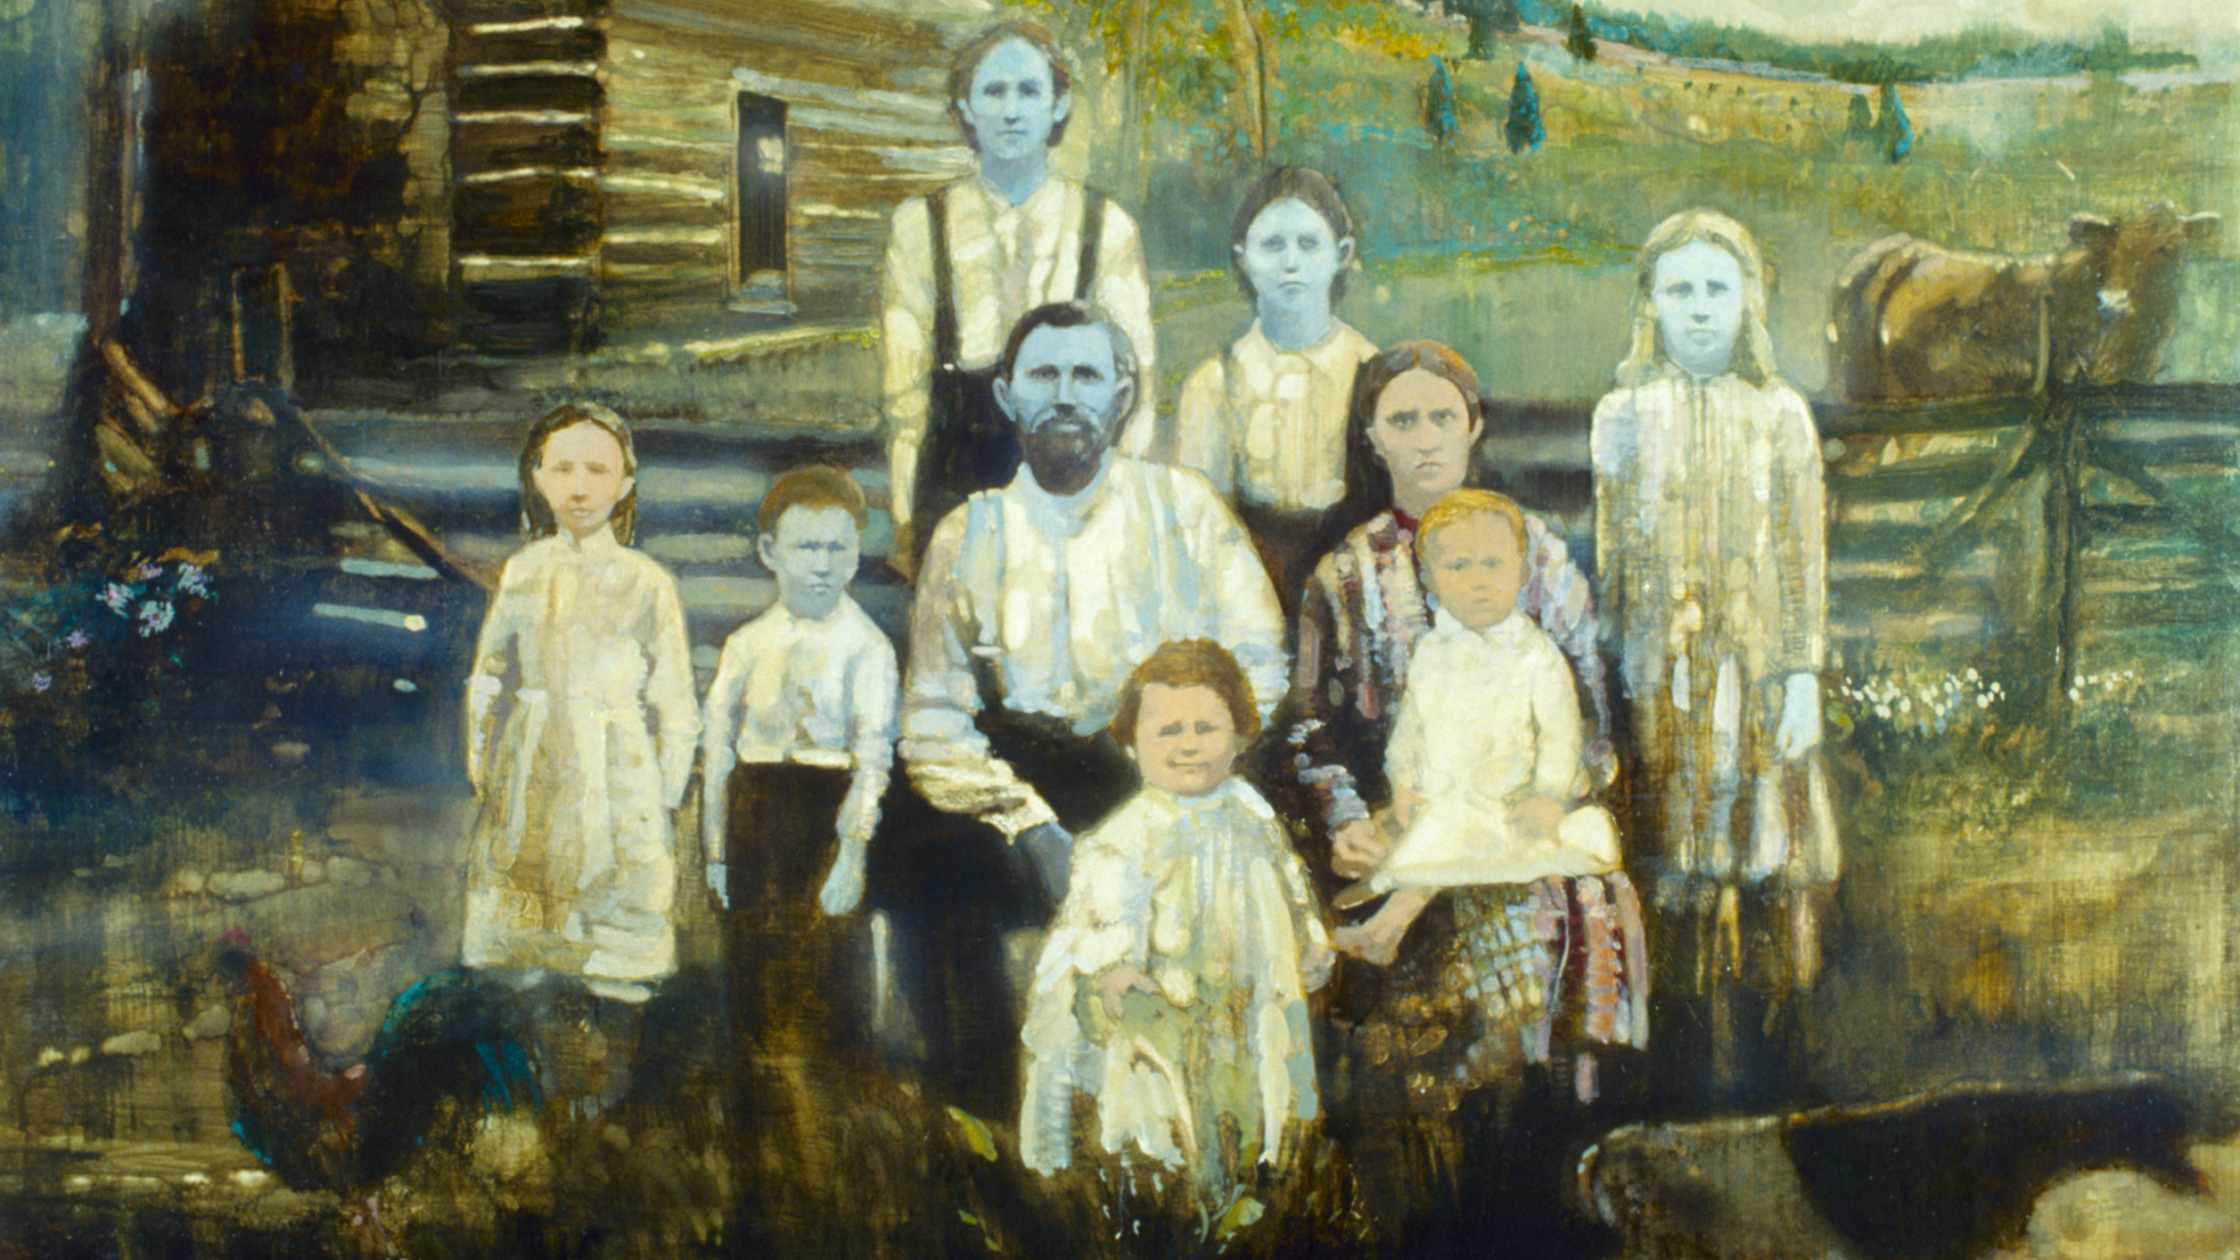 The strange story of the Blue People of Kentucky 1